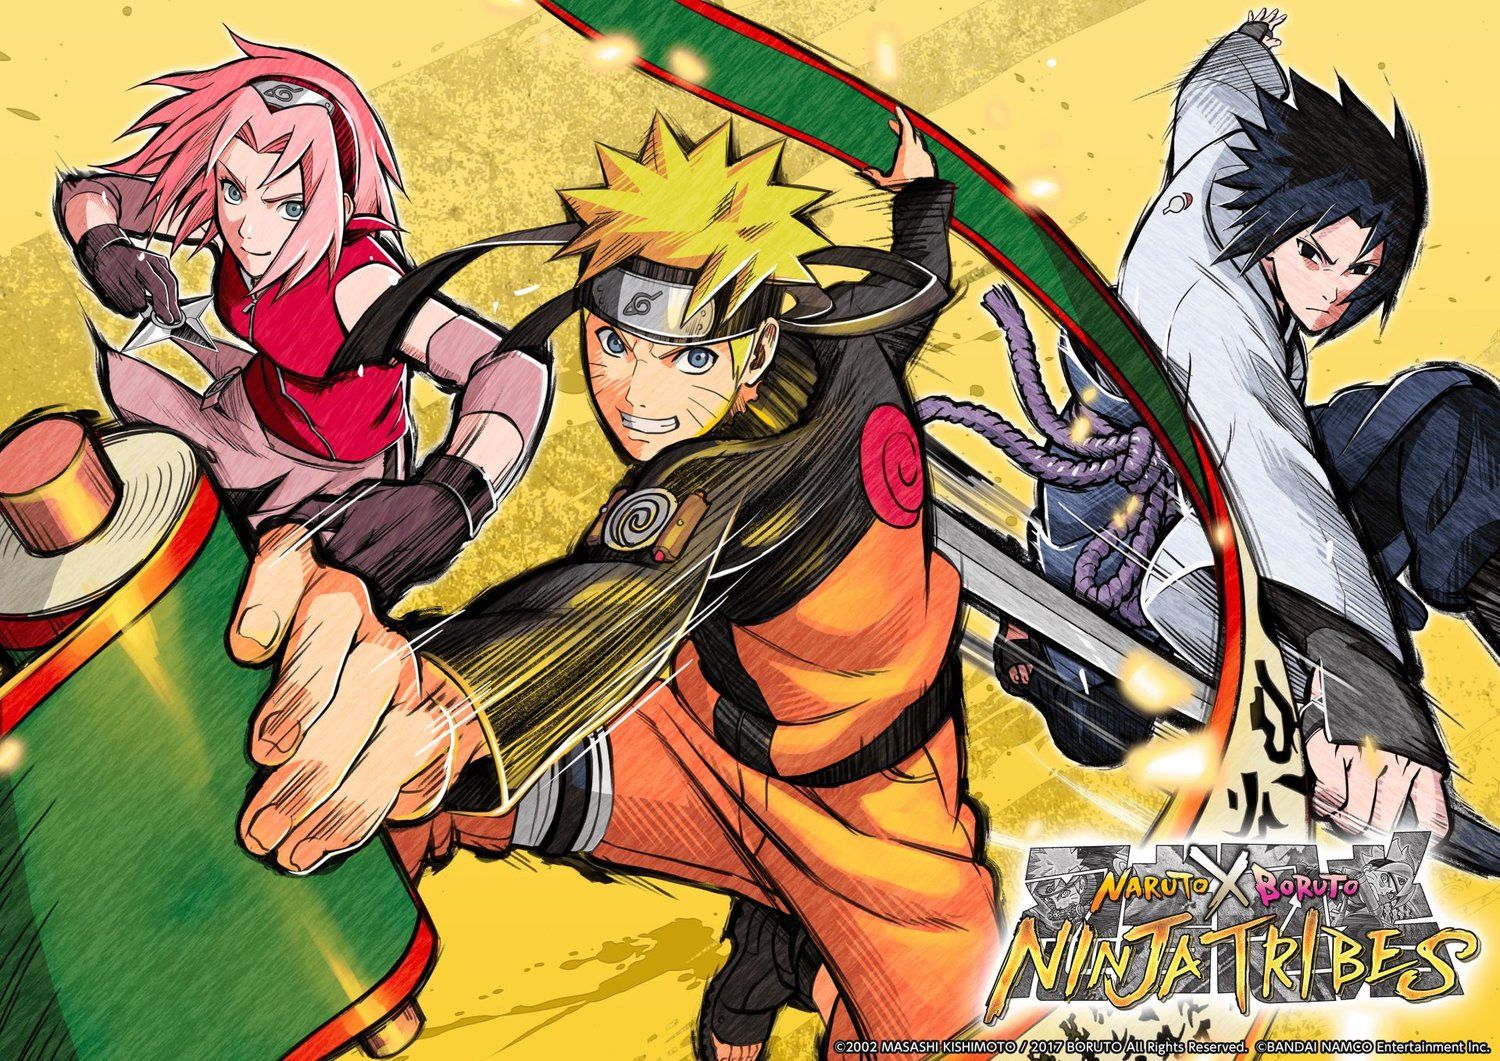 NARUTO X BORUTO NINJA TRIBES is the First Game from a Partnership